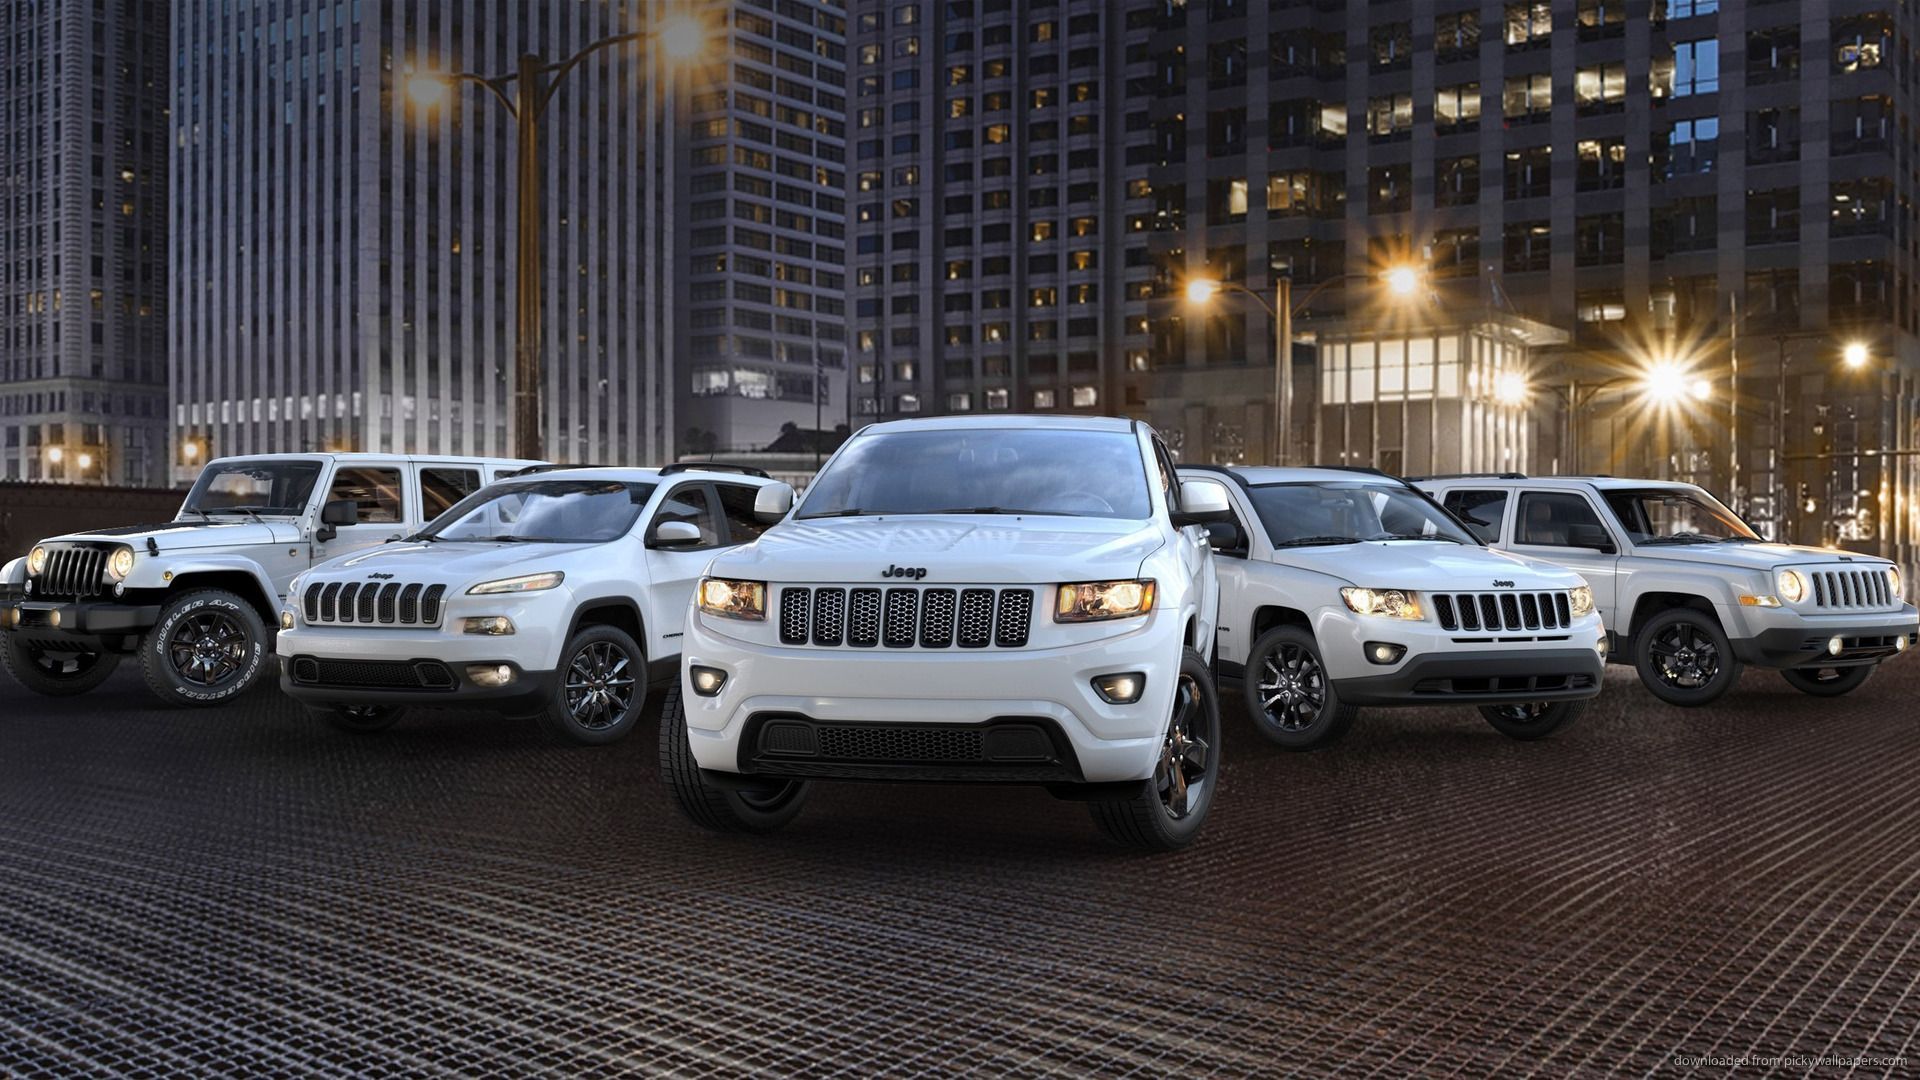 2014 Jeep Altitude Family Wallpaper For iPhone 4